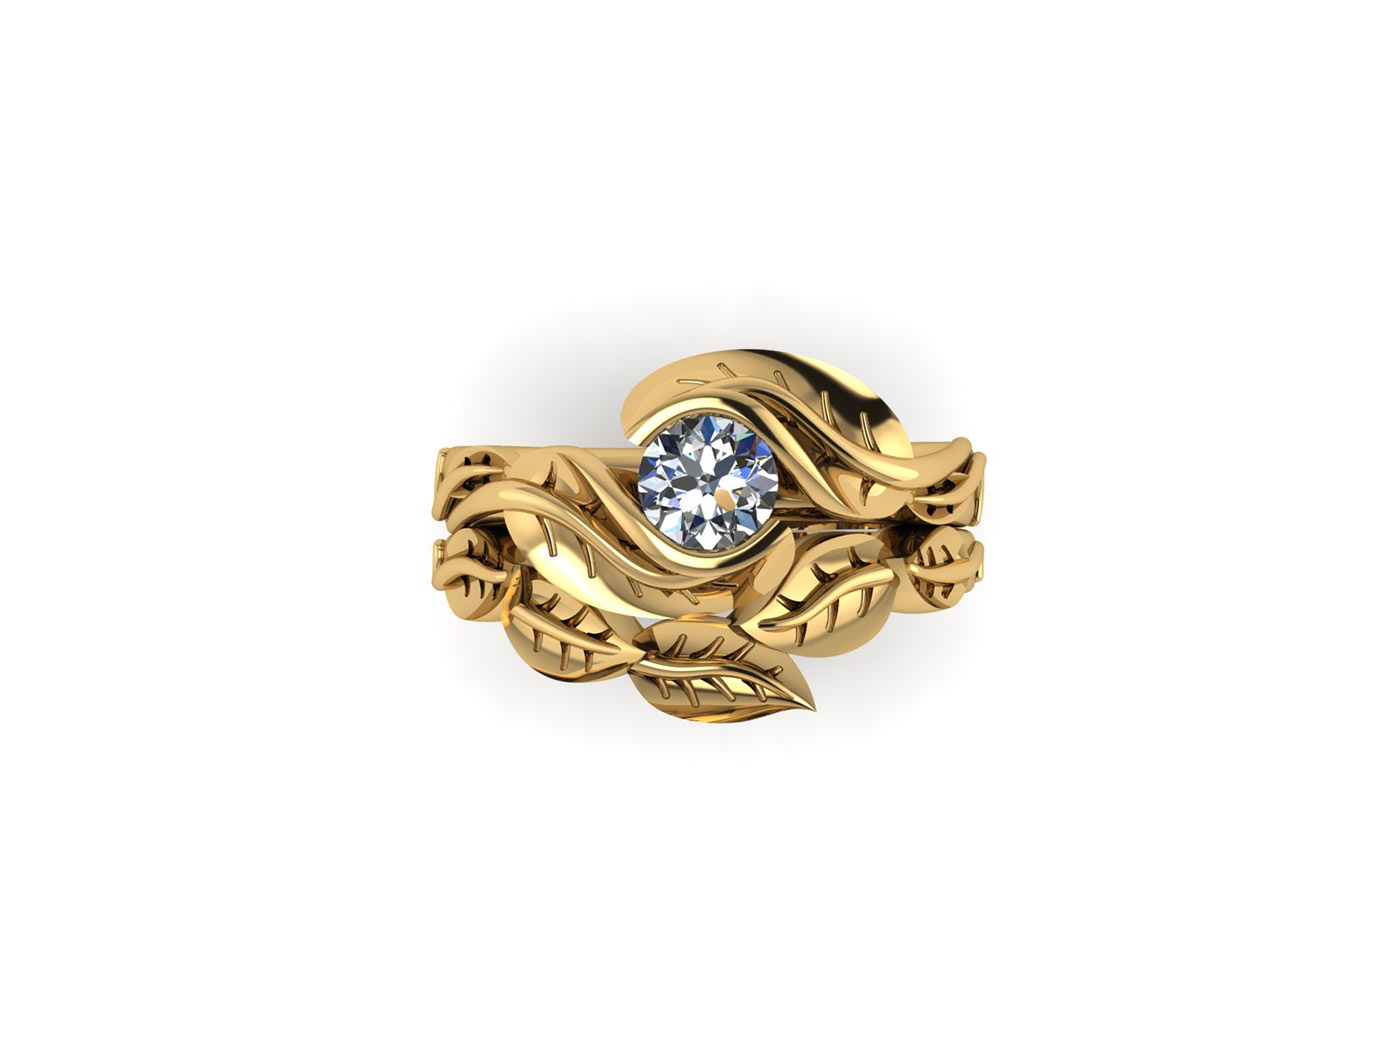 3D band diamond  gold jewellry jewelry model printable ring silver